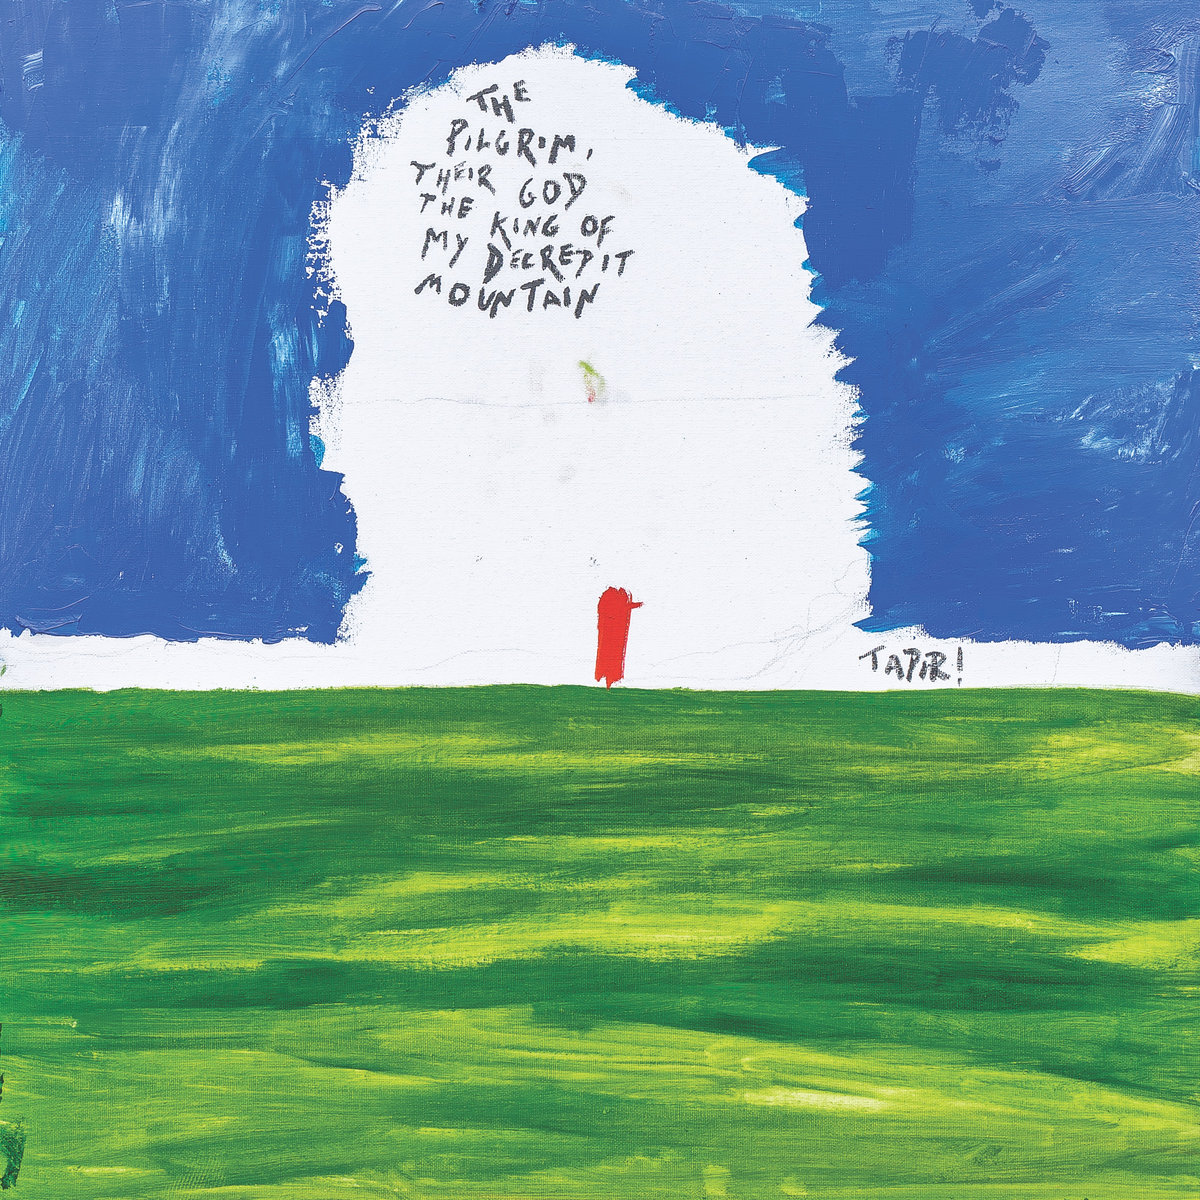 Upper half of image shows painted blue sky above green grass or fields in bottom half, with white strip separating them. From the white strip, a large white head-shaped area rising up through the blue. In this, appears the text: The Pilgrim, their God, the King of my Decrepit Mountain' in black.. Standing on the green line that forms the border with the grassy area, is a small figure in red, with the word 'Tapir!' written alongside in black against the white background.